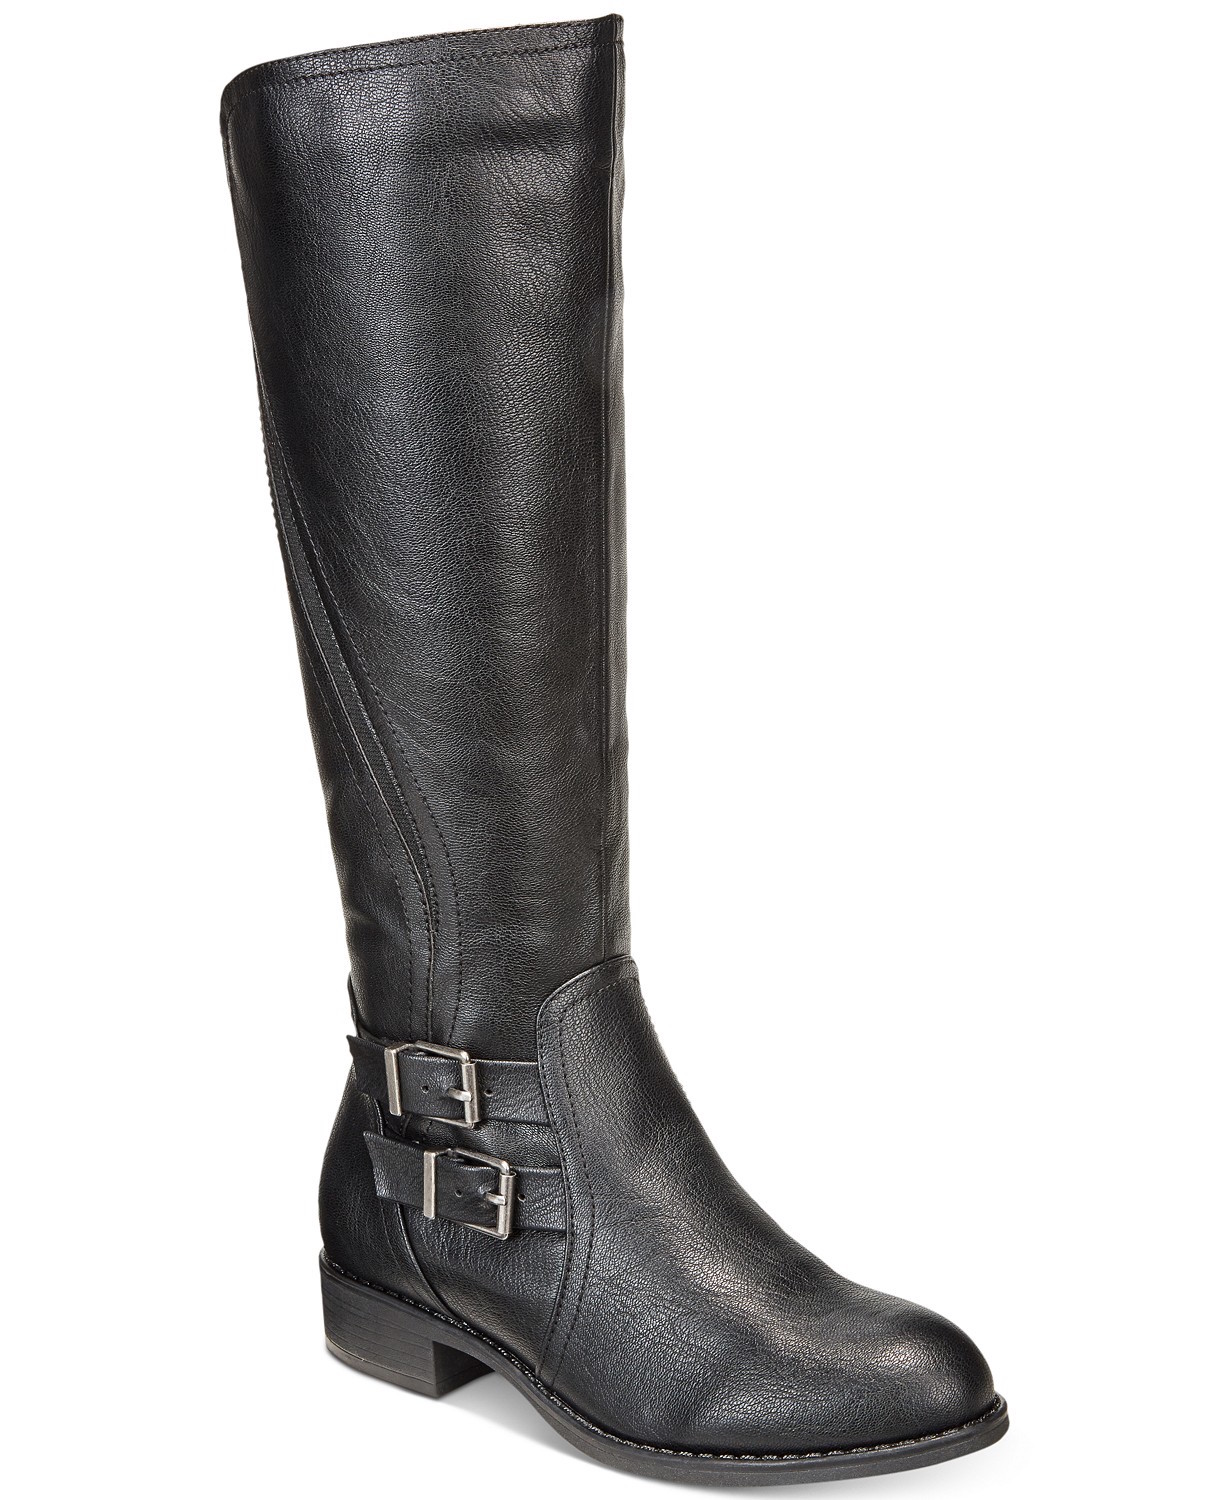 Style & Co. Womens Milah Almond Toe Knee High Fashion Boots, Black ...